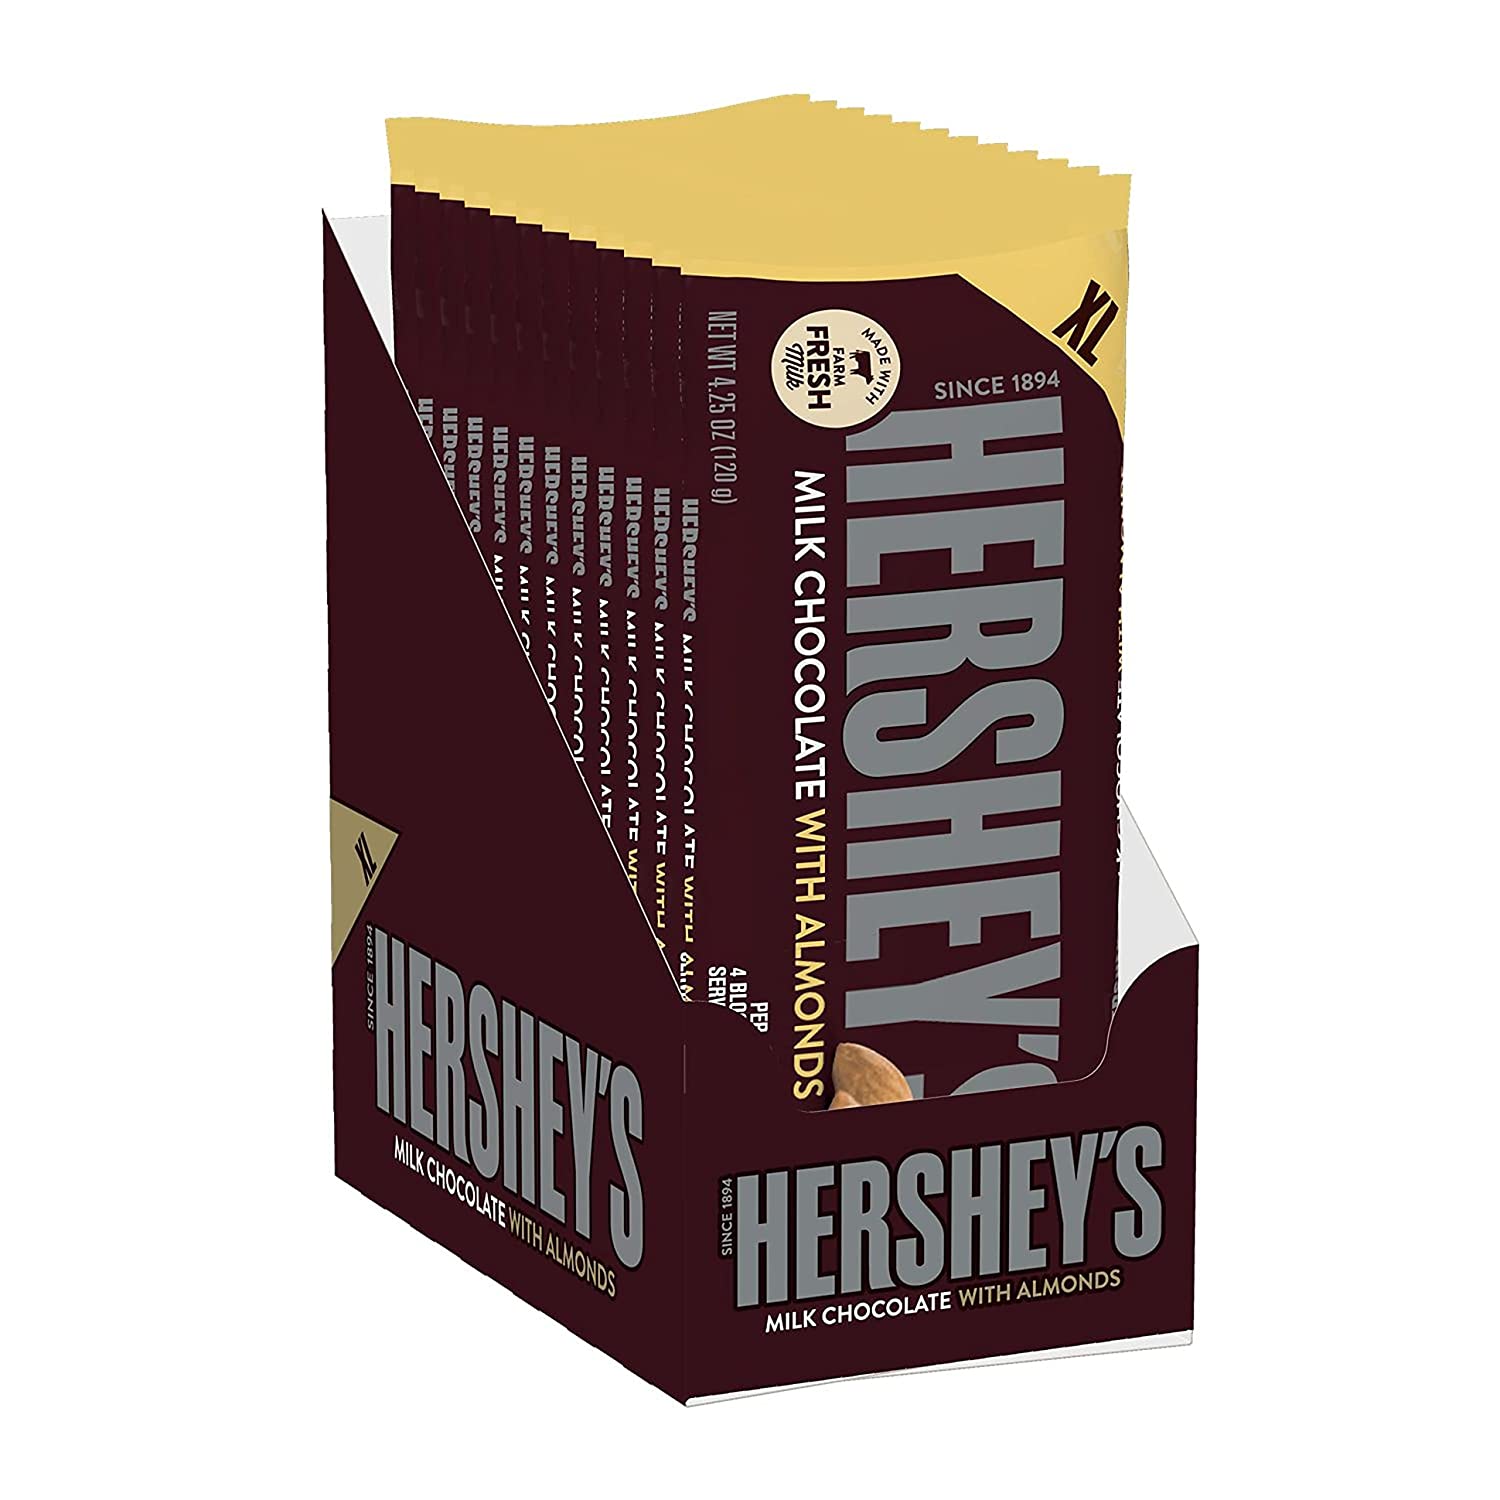 HERSHEY'S Milk Chocolate with Almonds Candy, Holiday, 4.25 oz Extra Large Bars (12 Count) - $15.10 AC w/10% S&S, $16.87 AC w/S&S